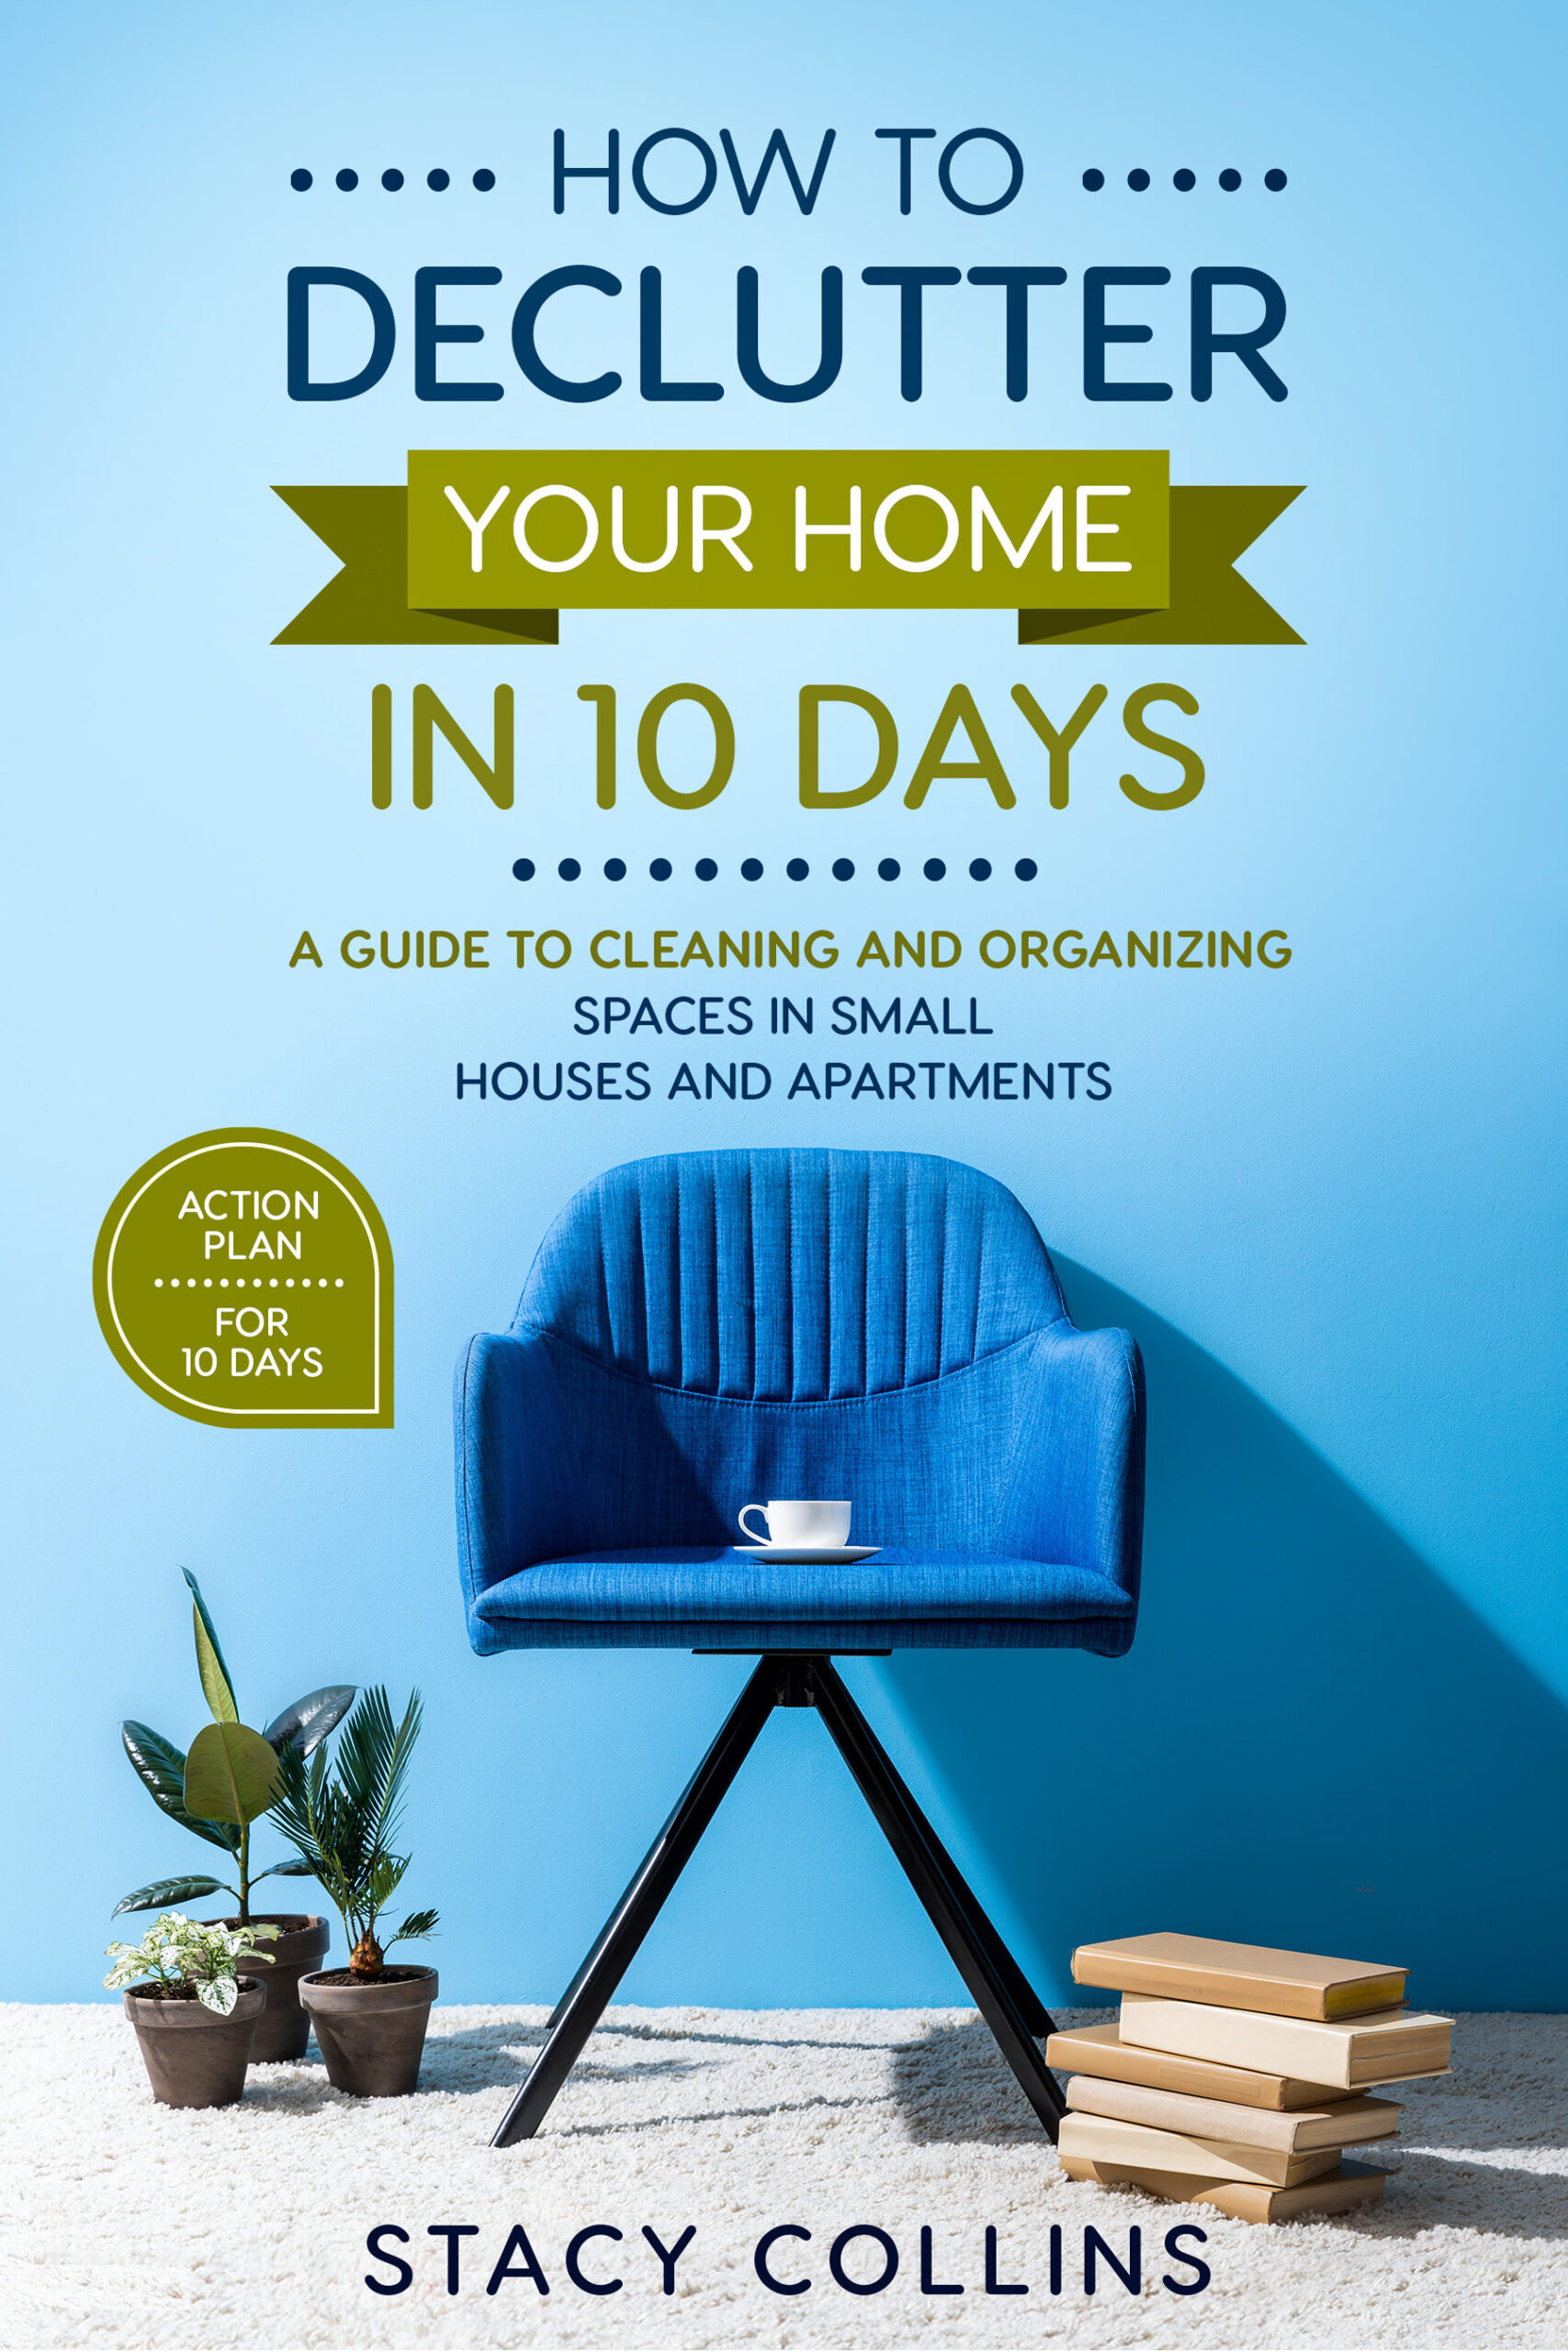 FREE: How to Declutter Your Home in10 Days: A Guide to Cleaning and Organizing Spaces in Small Houses and Apartments by Stacy Collins